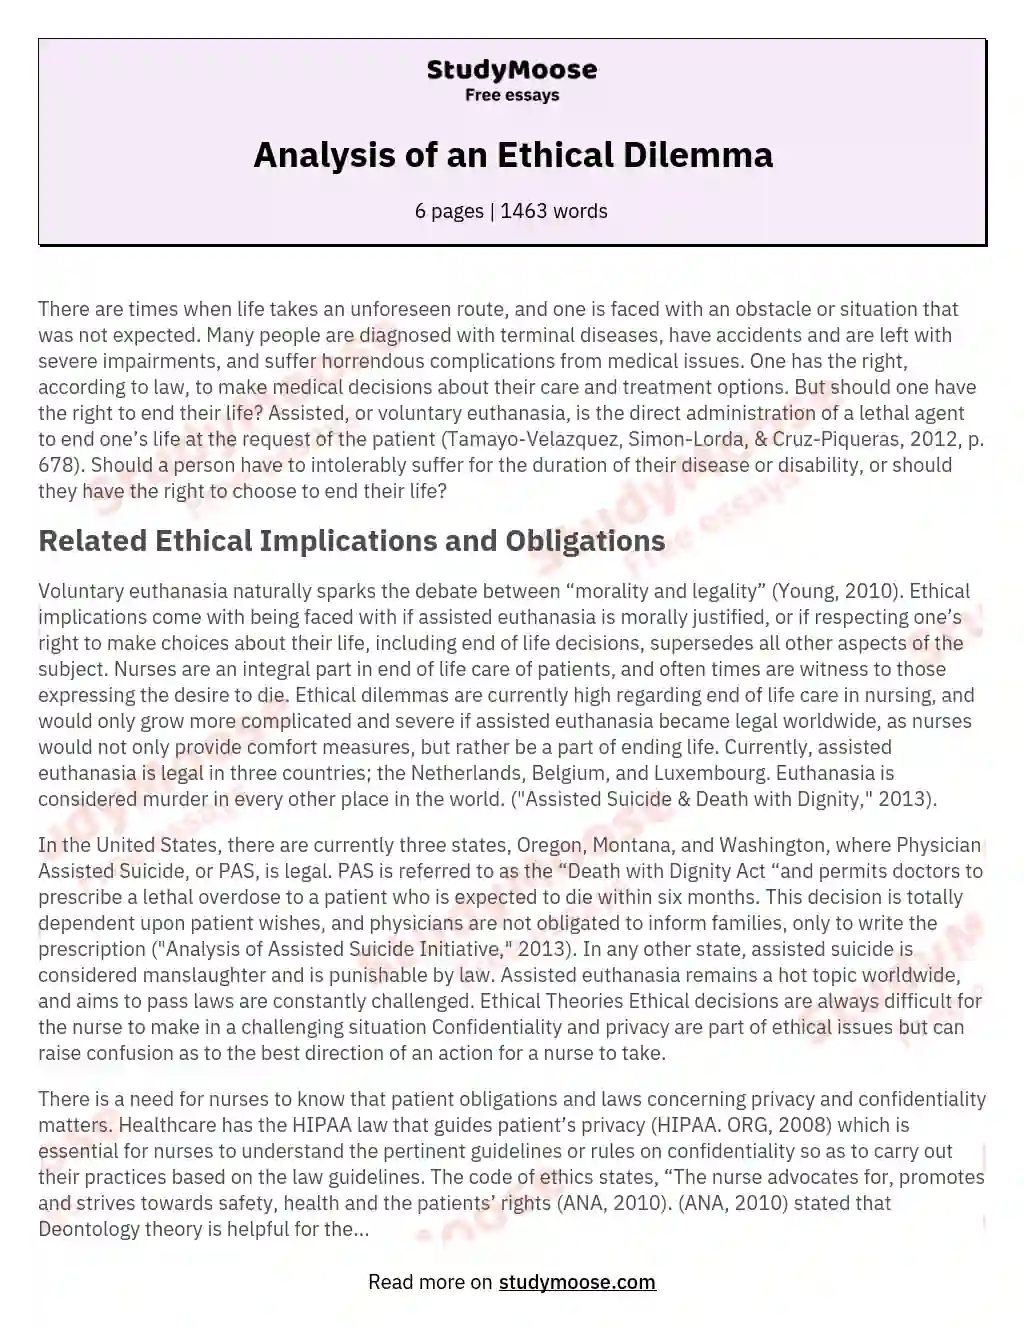 Ethical Dilemmas in Euthanasia: Nurses' Role and Responsibilities essay